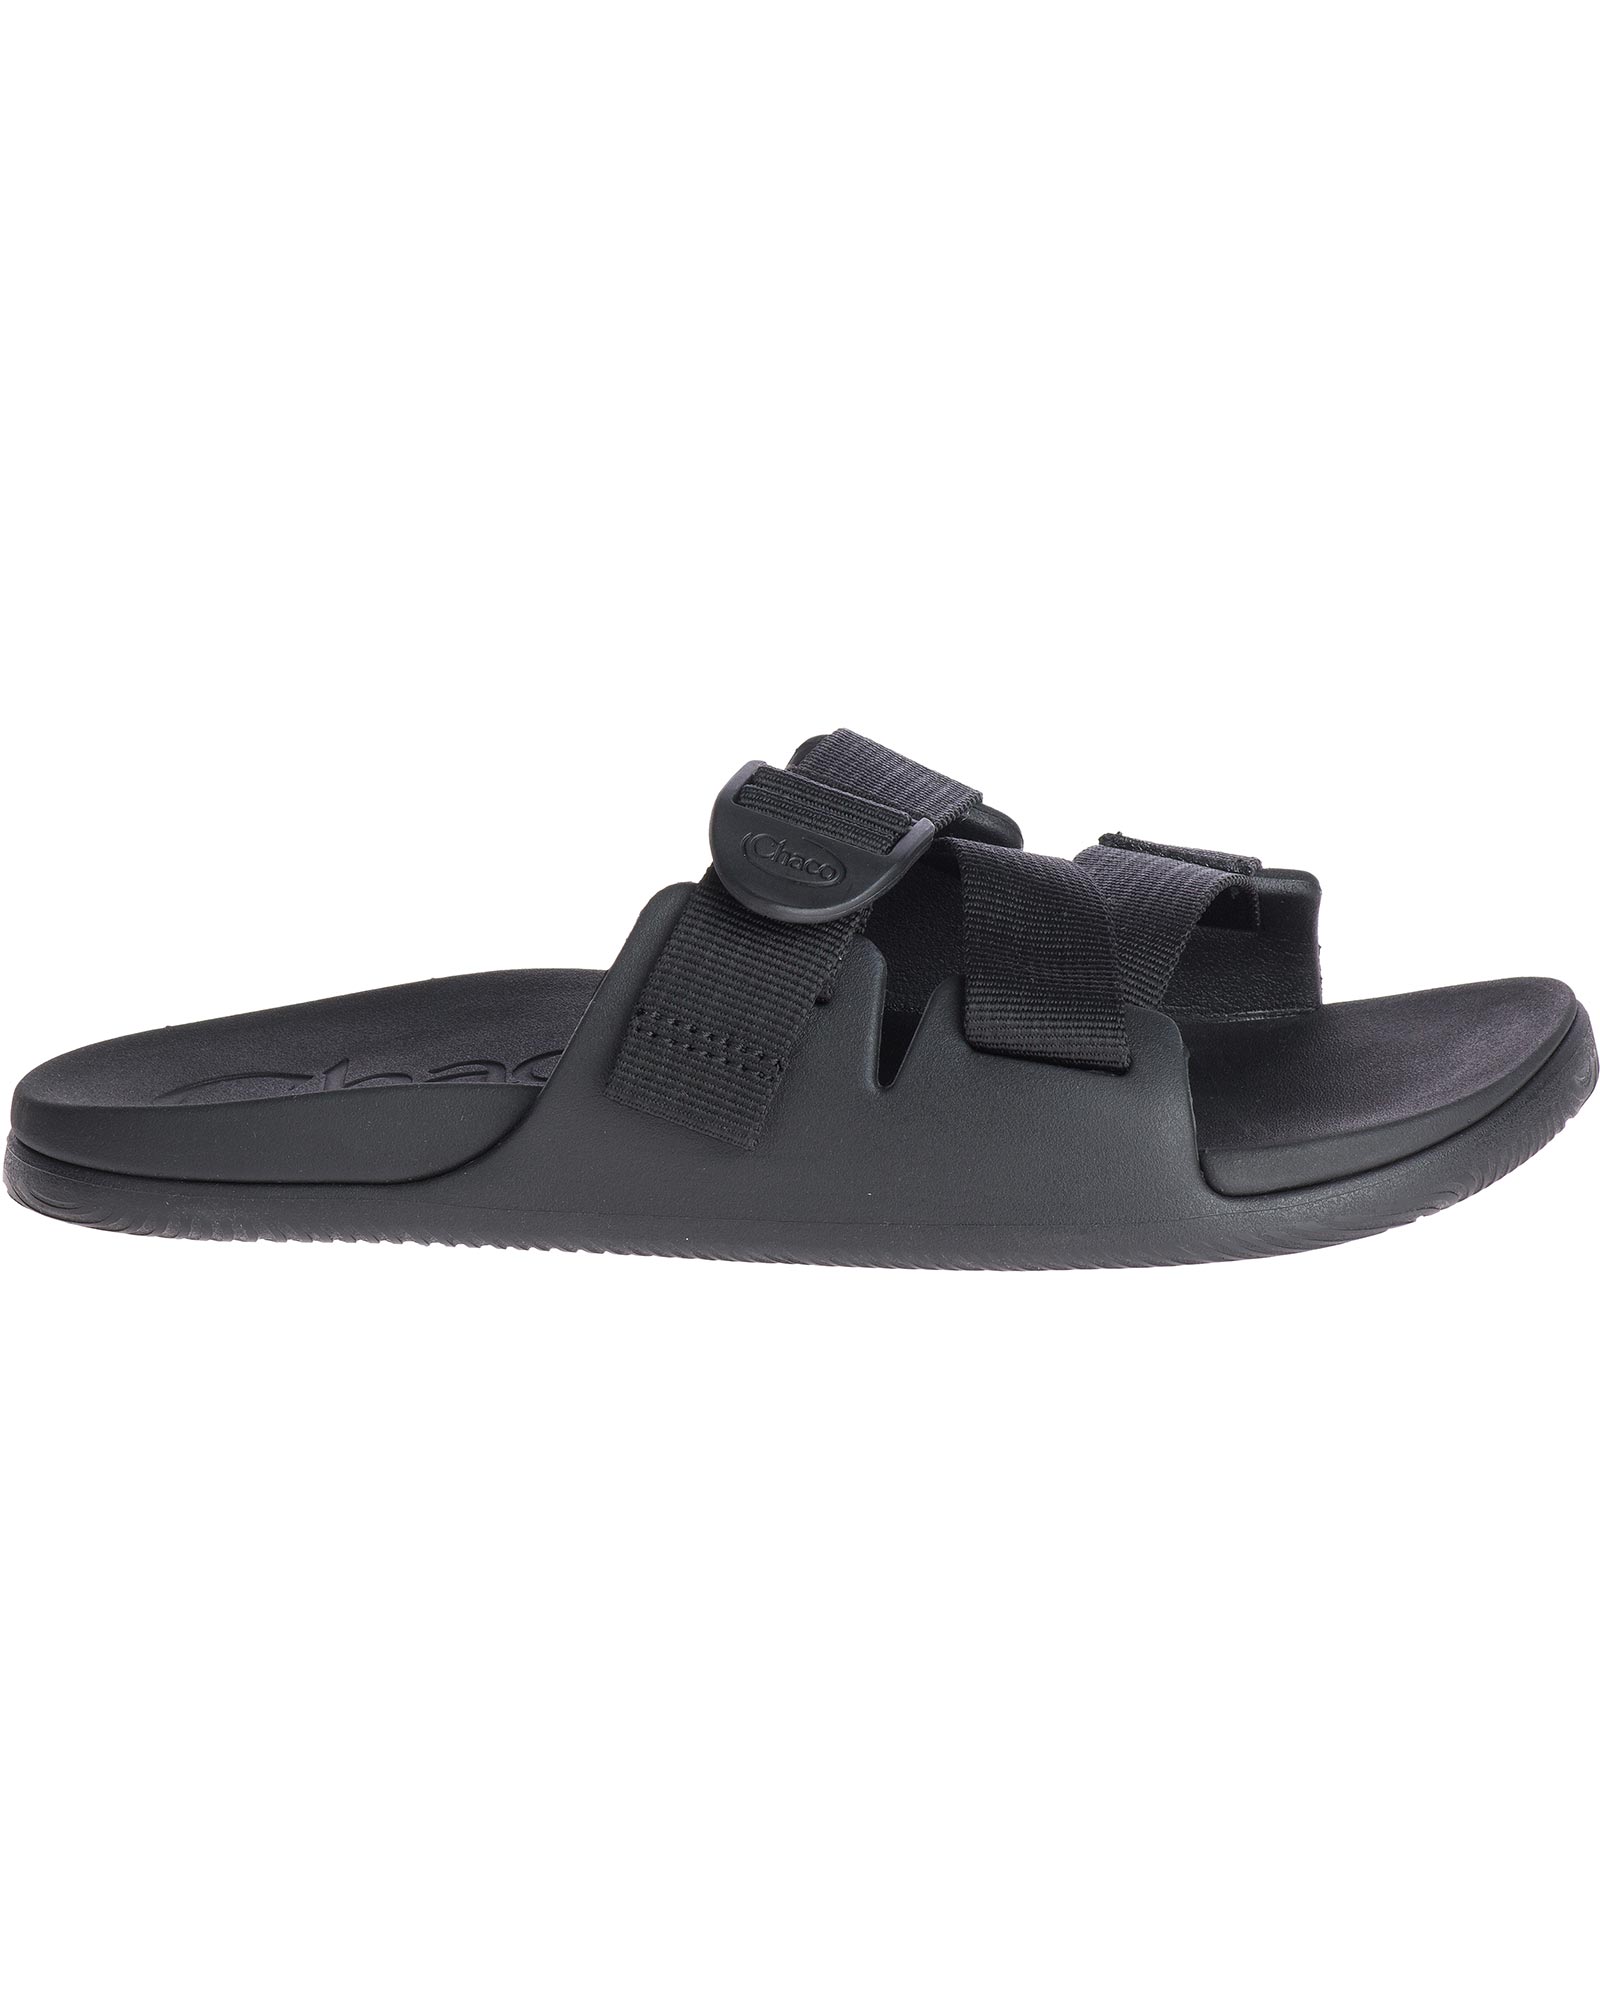 Product image of Chaco Women's ChillosÂ Slides